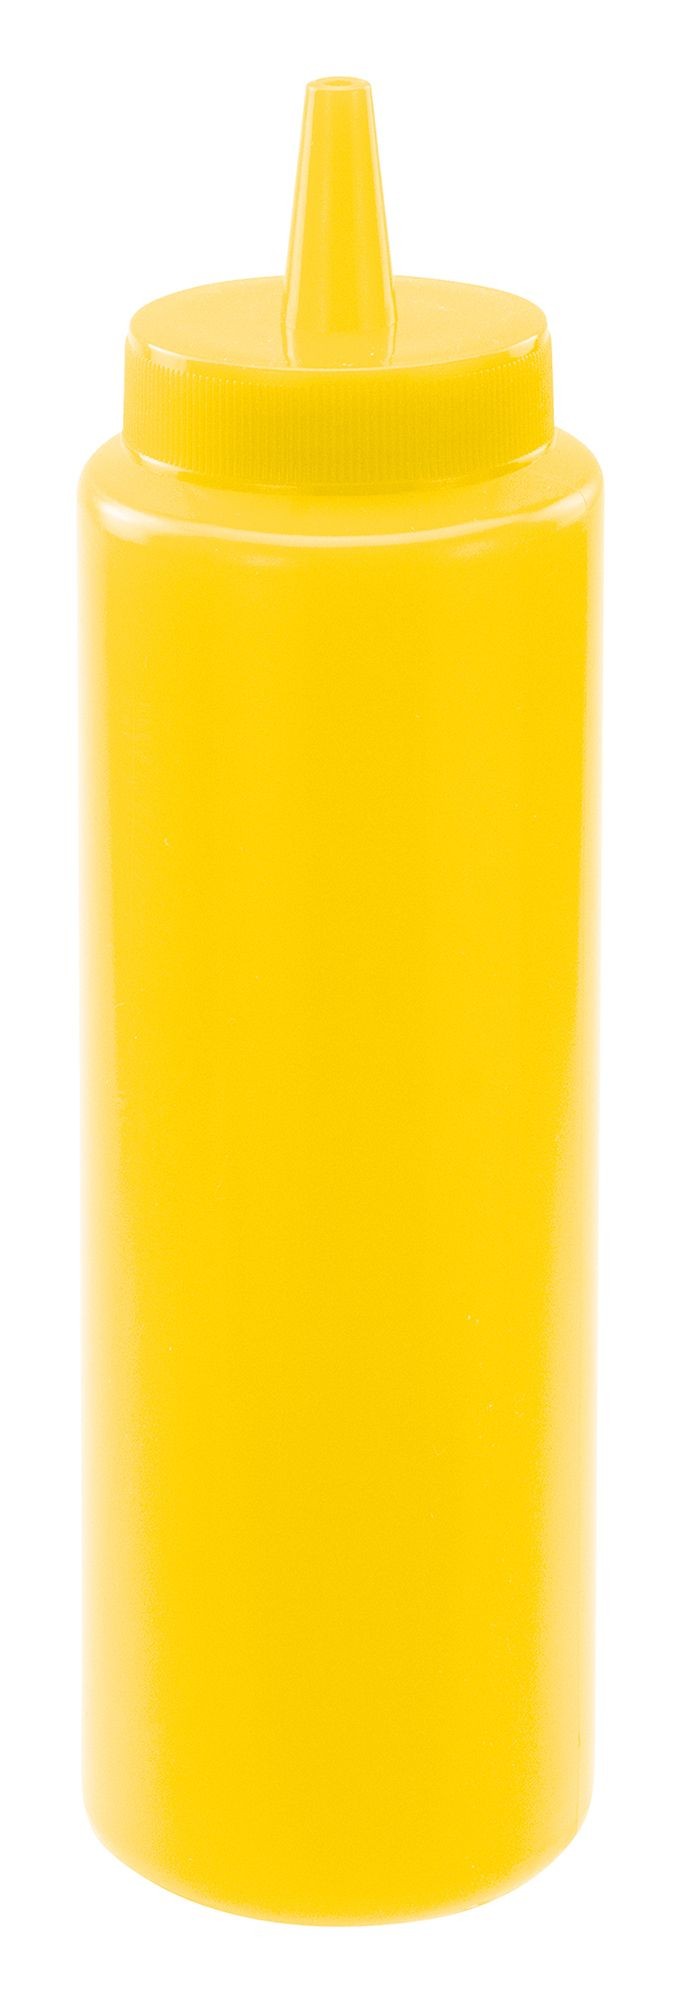 Winco PSB-08Y Yellow Plastic 8 oz. Squeeze Bottle